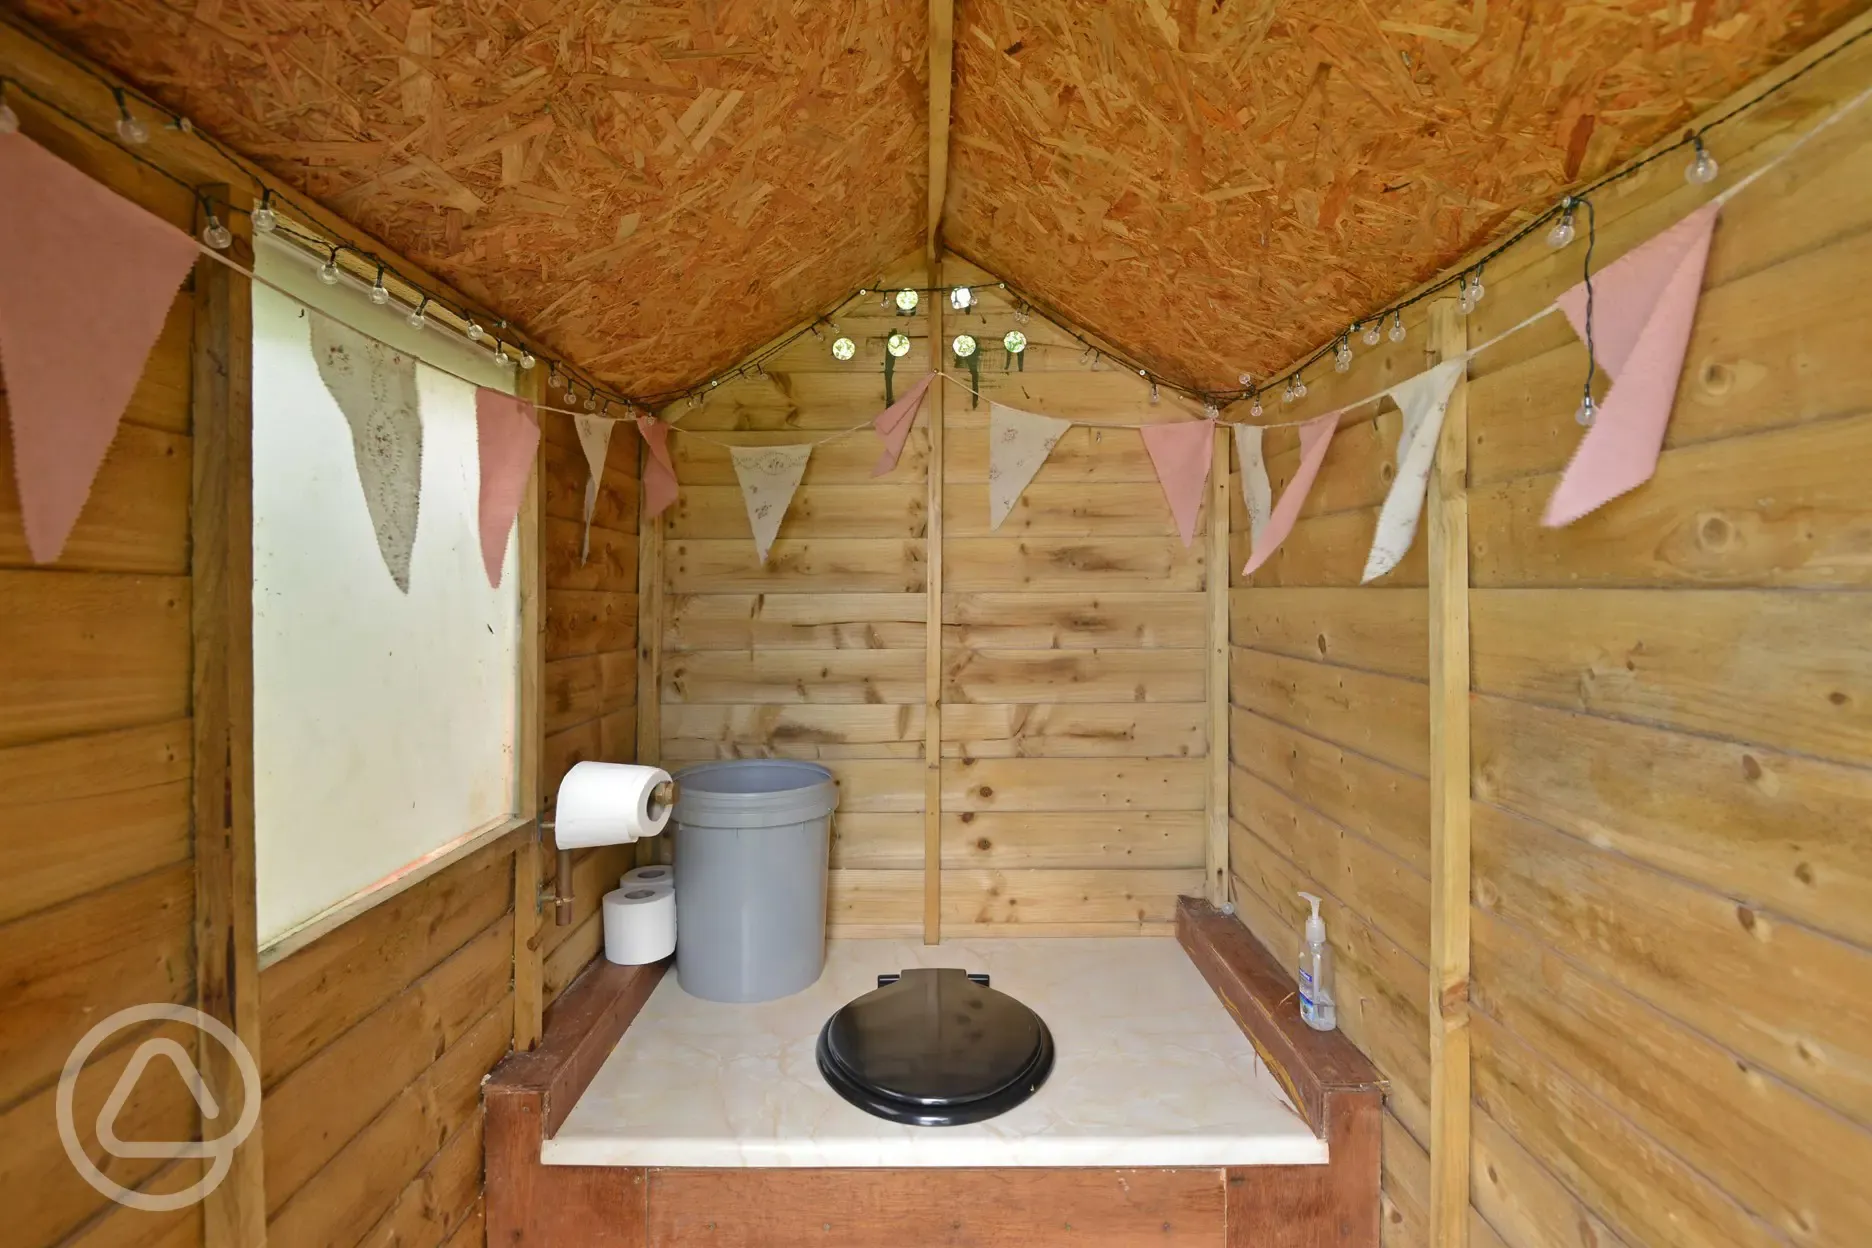 Compost loos